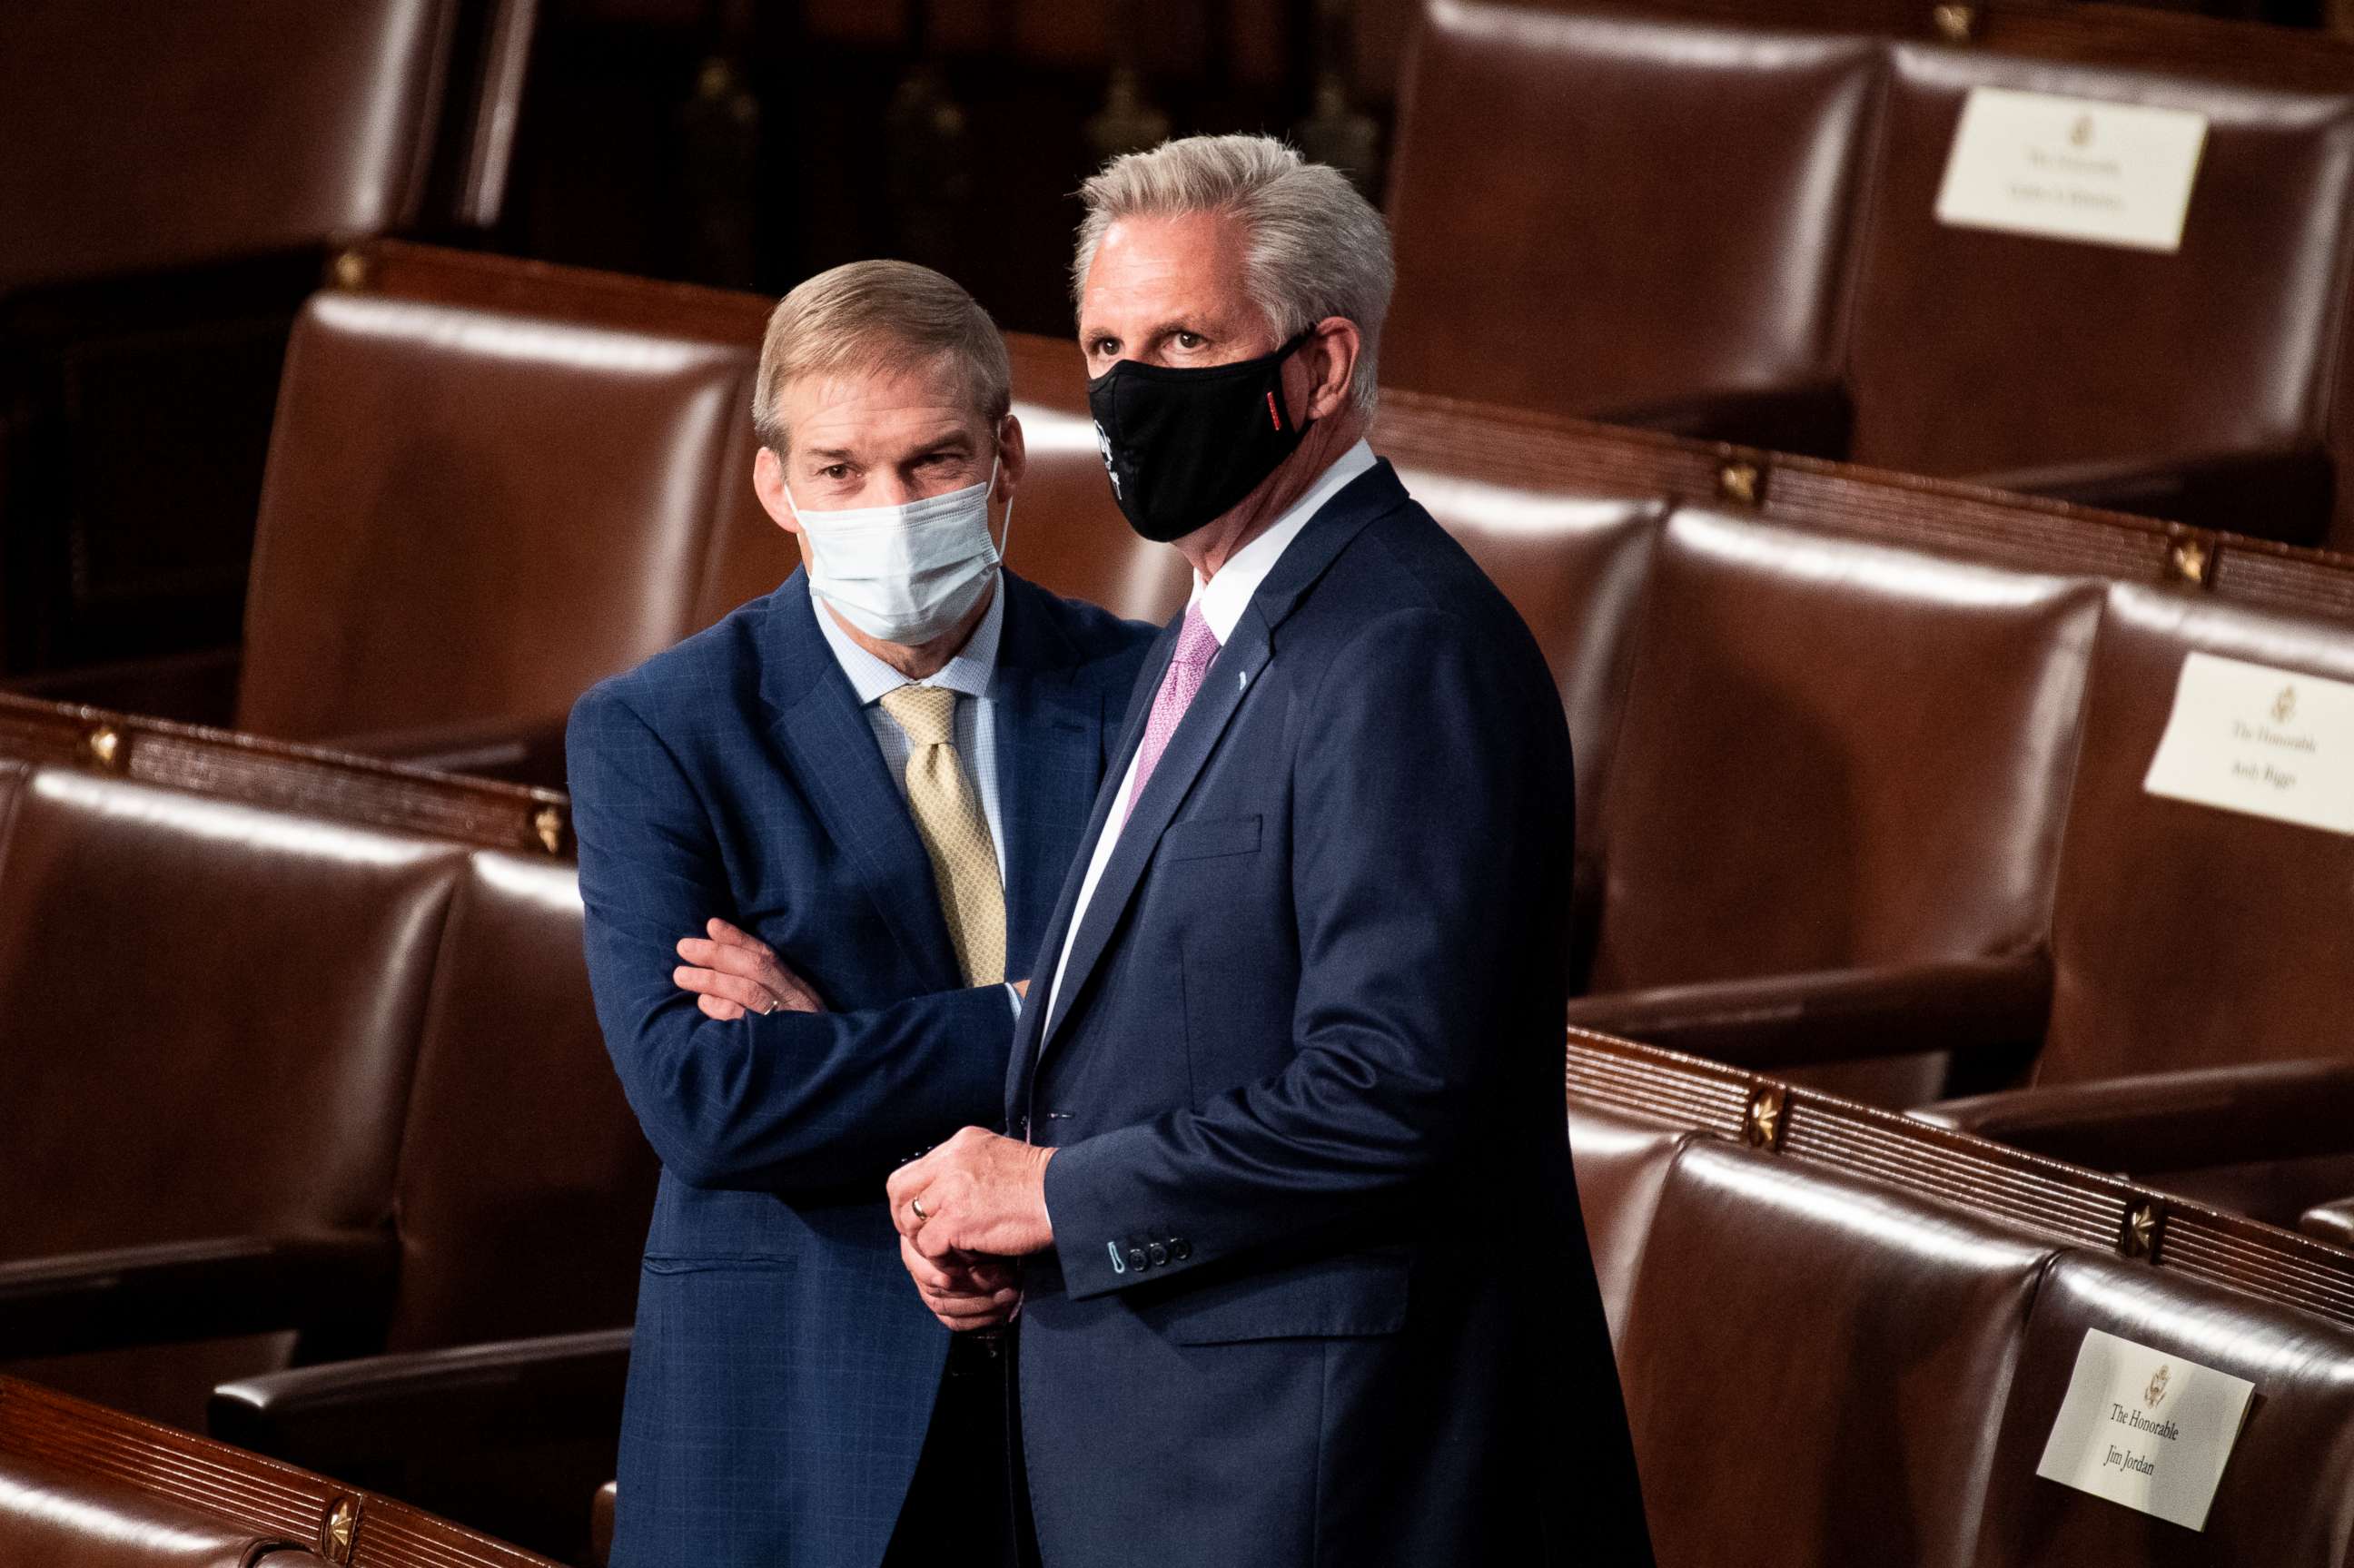 PHOTO: Rep. Jim Jordan and House Minority Leader Kevin McCarthy talk before the start of President Joe Biden's address to the joint session of Congress in the House chamber of the U.S. Capitol, April 28, 2021, in Washington.